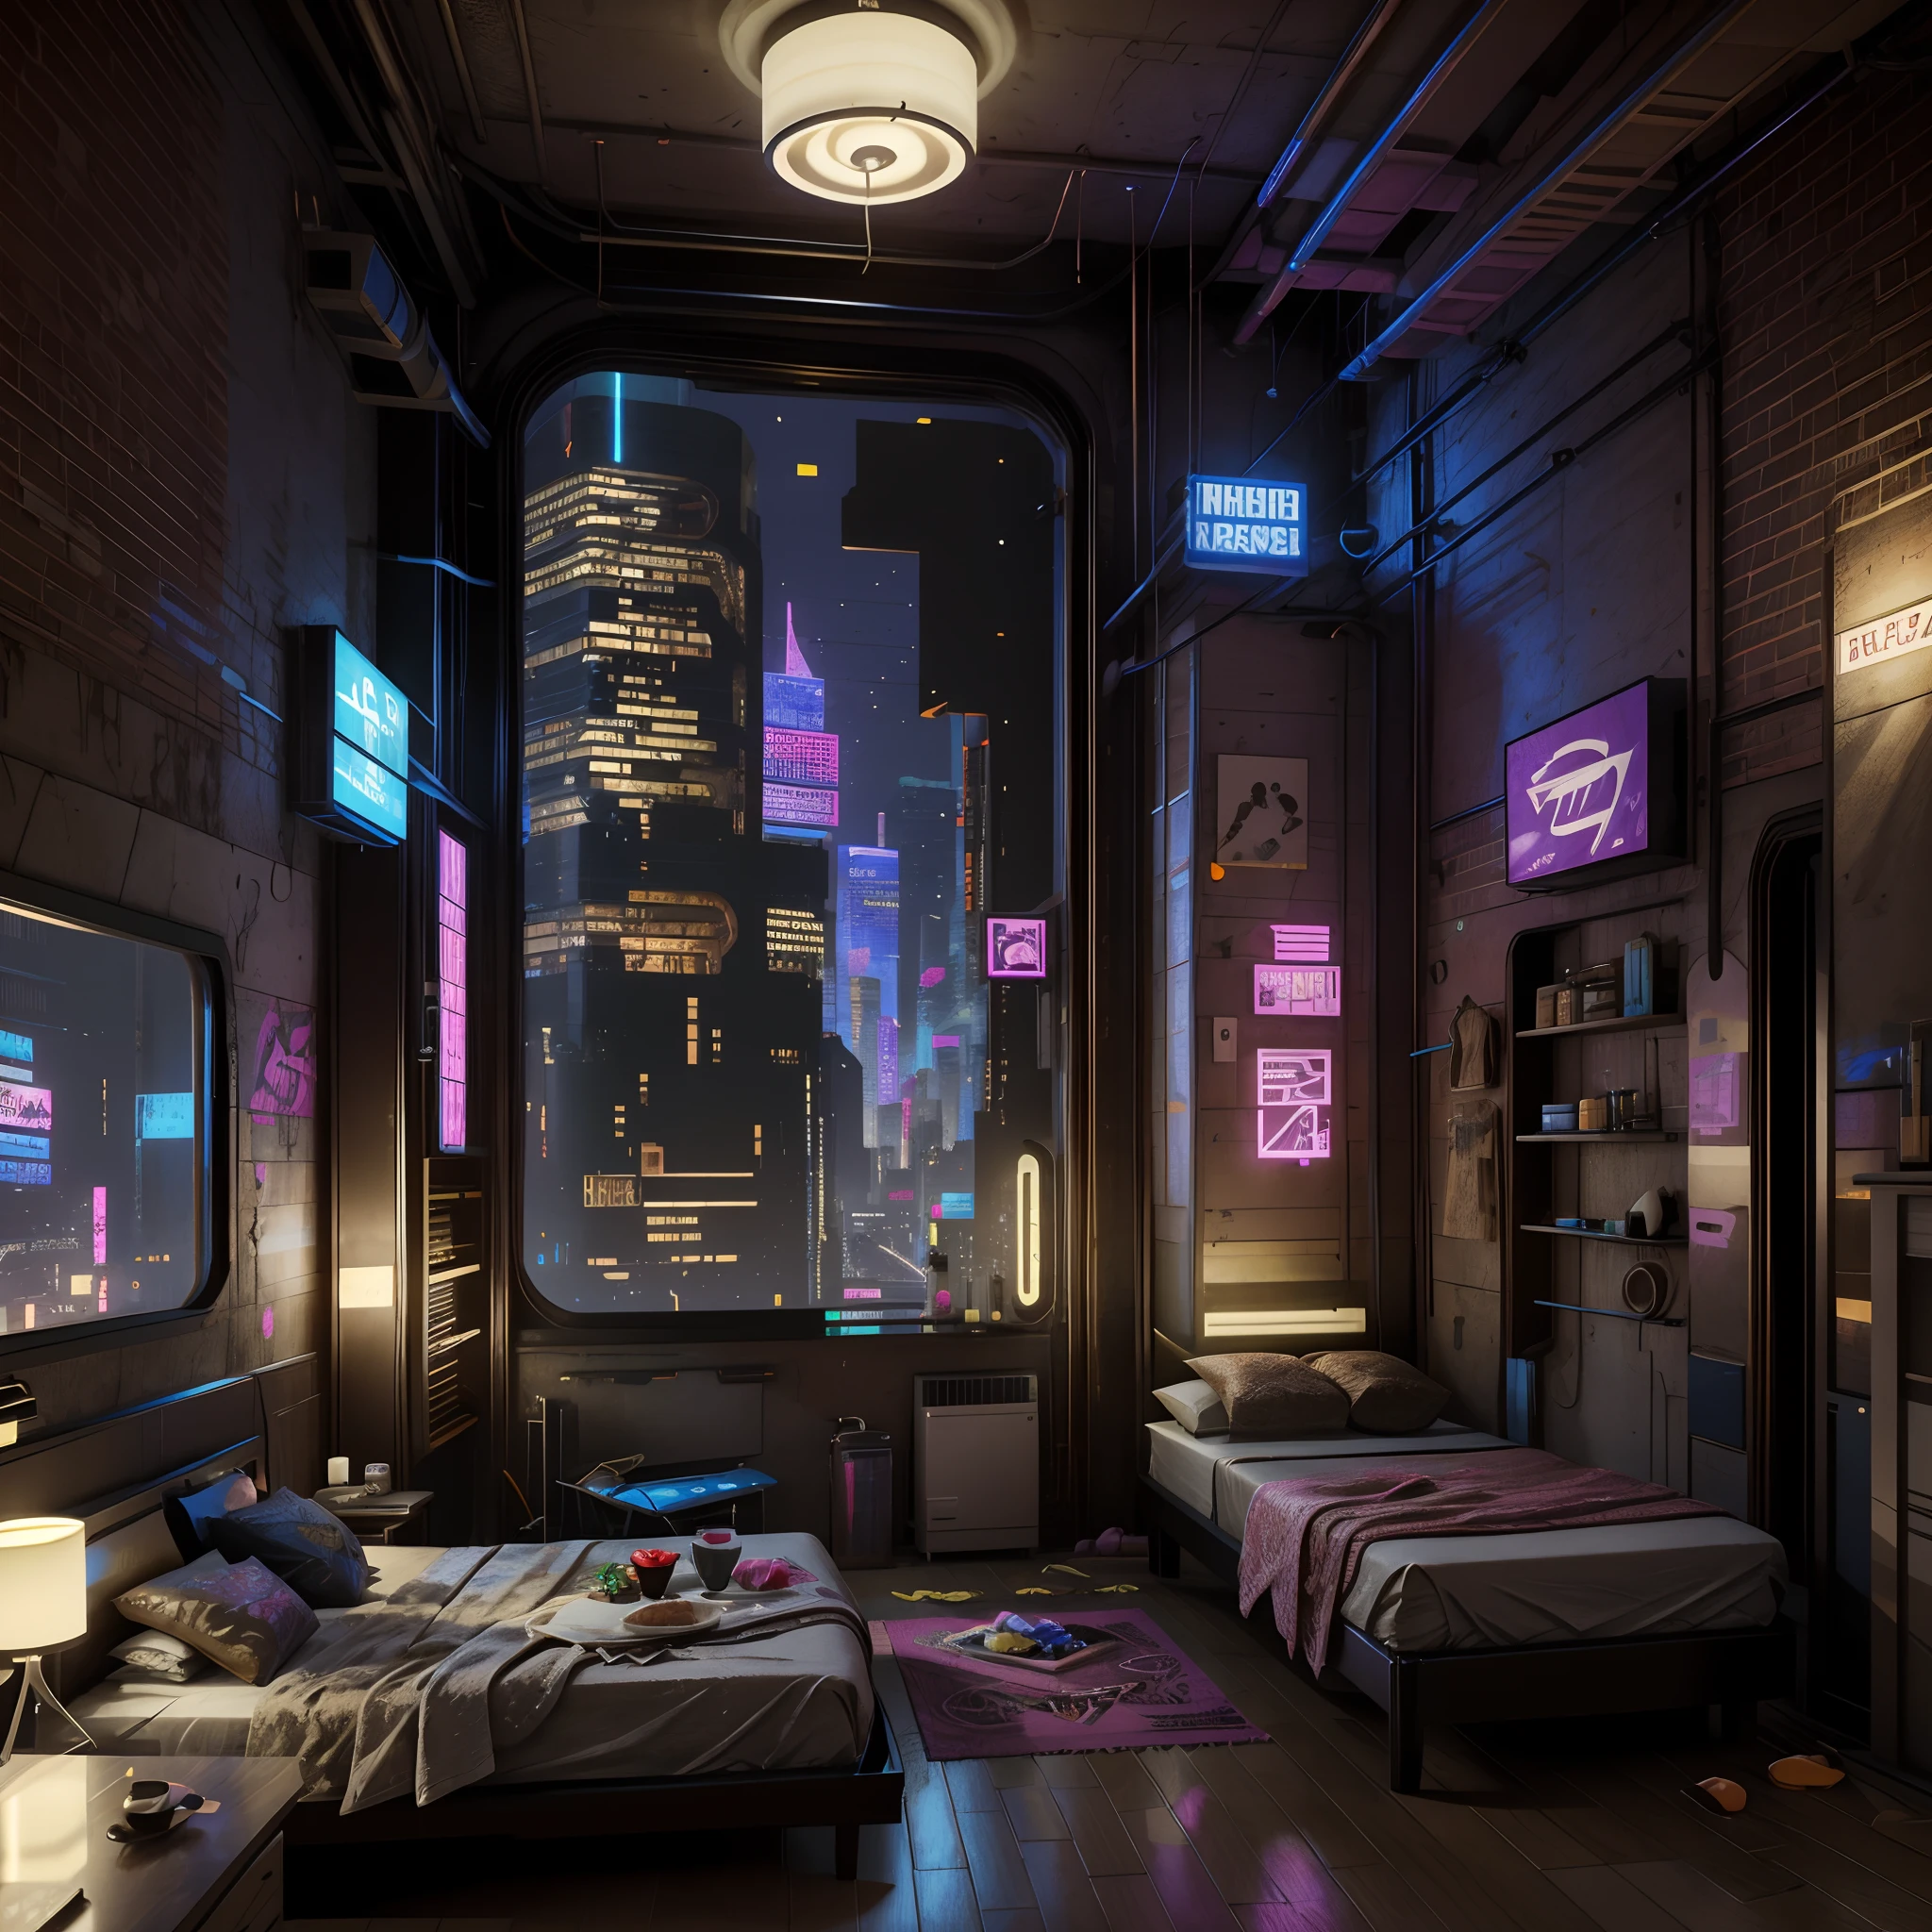 This is a cyberpunk fantasy image. Generate a cozy bedroom surrounded by a cyberpunk city. The bedroom serves as an oasis in the middle of a chaotic cyberpunk city. The bedroom has windows. Through the bedroom's windows the colorful, very detailed, and beautifully complex cyberpunk cityscape is visible. The image should be dynamic and compelling and realistic. (((masterpiece))), (((best quality))), ((ultra-detailed)),(highly detailed CG illustration)